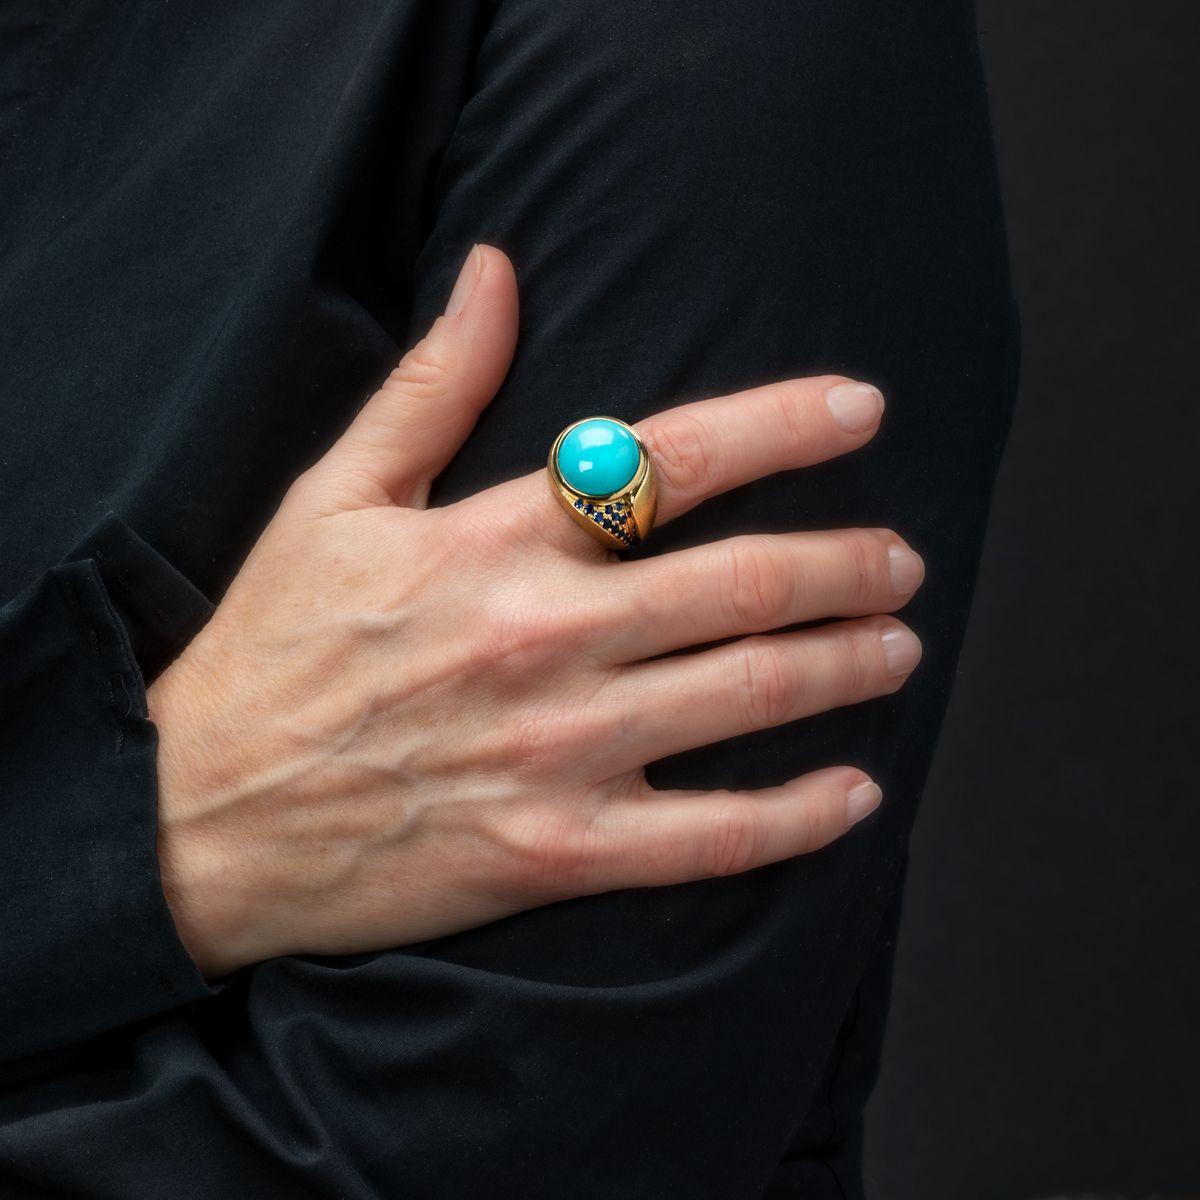 Boasting a magnificently large turquoise stone bezel set in an 18k yellow gold setting beside a wave of blue sapphires, this modern styled ring is both colourful and a fun statement piece to wear for any occasion.

Weight: Turquoise - 10.75